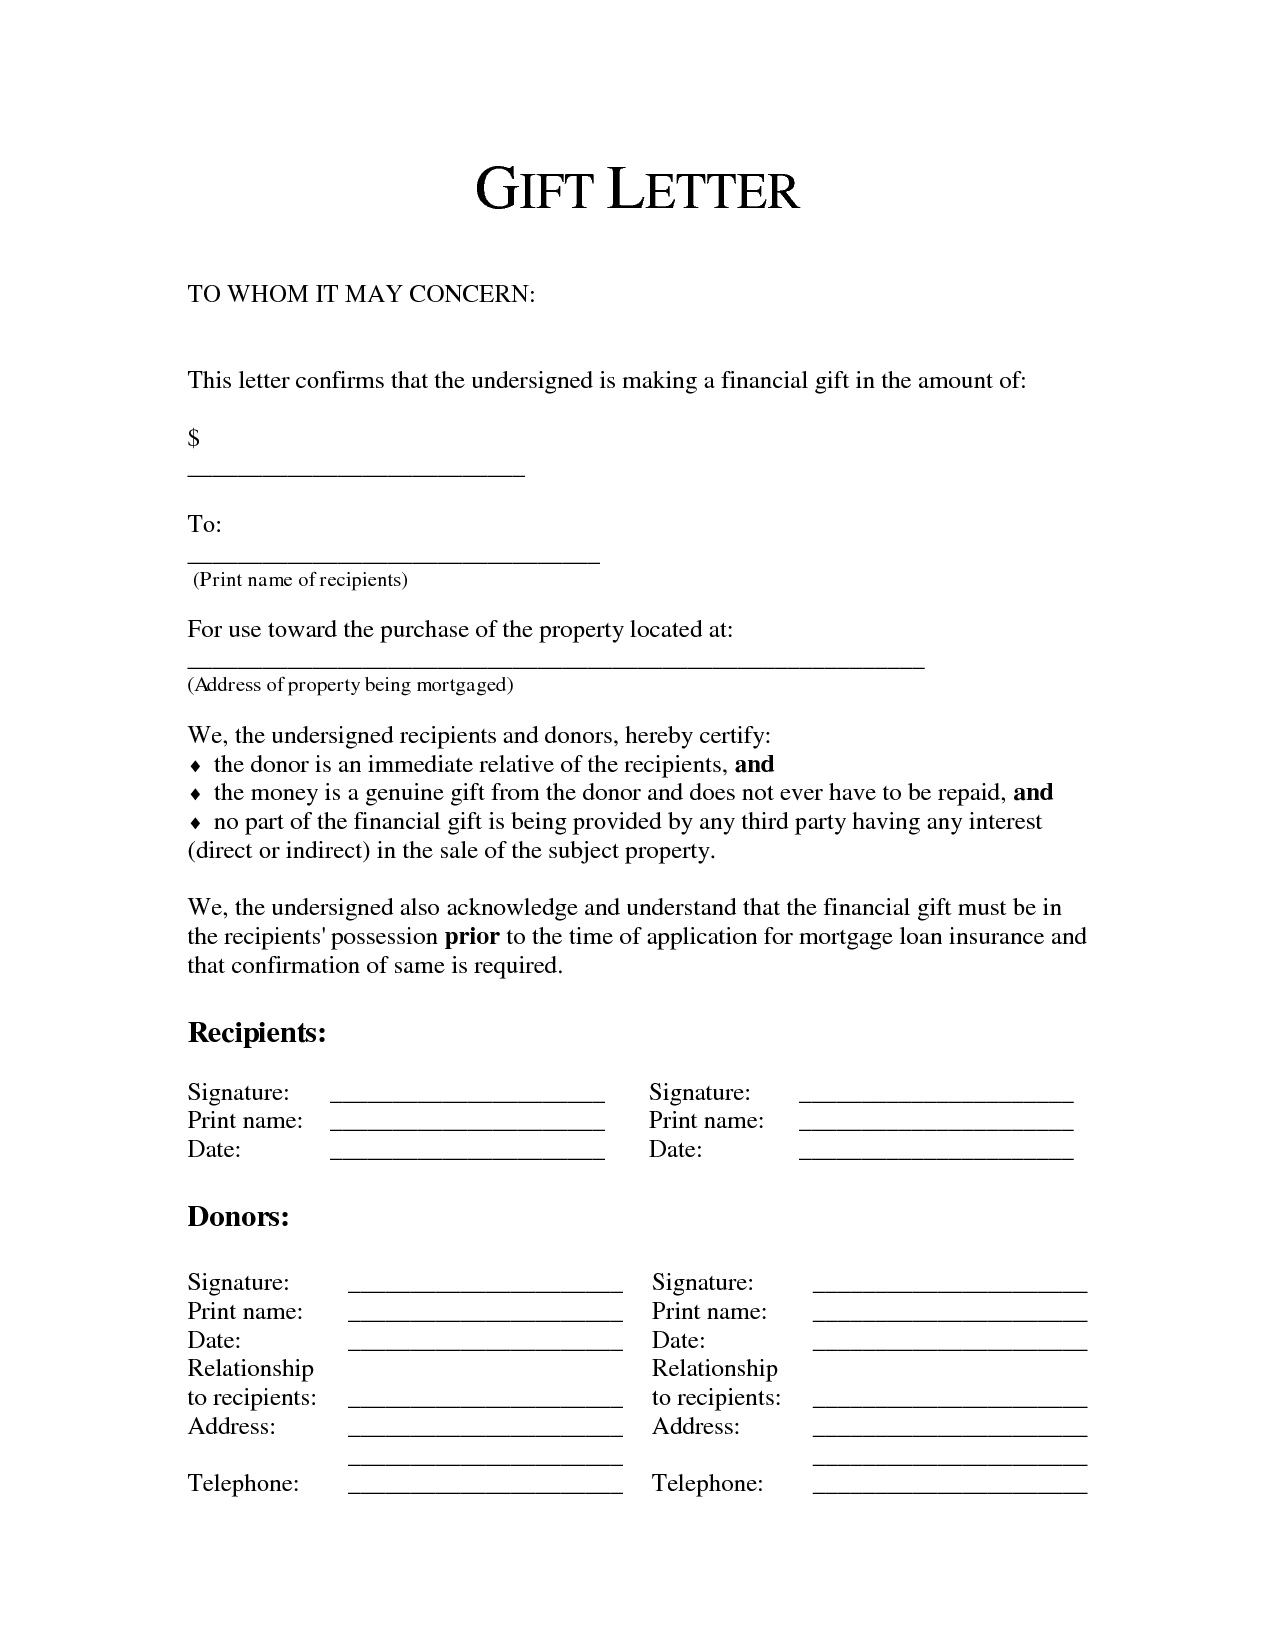 Car Gift Letter Template - How to Write A Gift Letter for A Car Choice Image Letter format